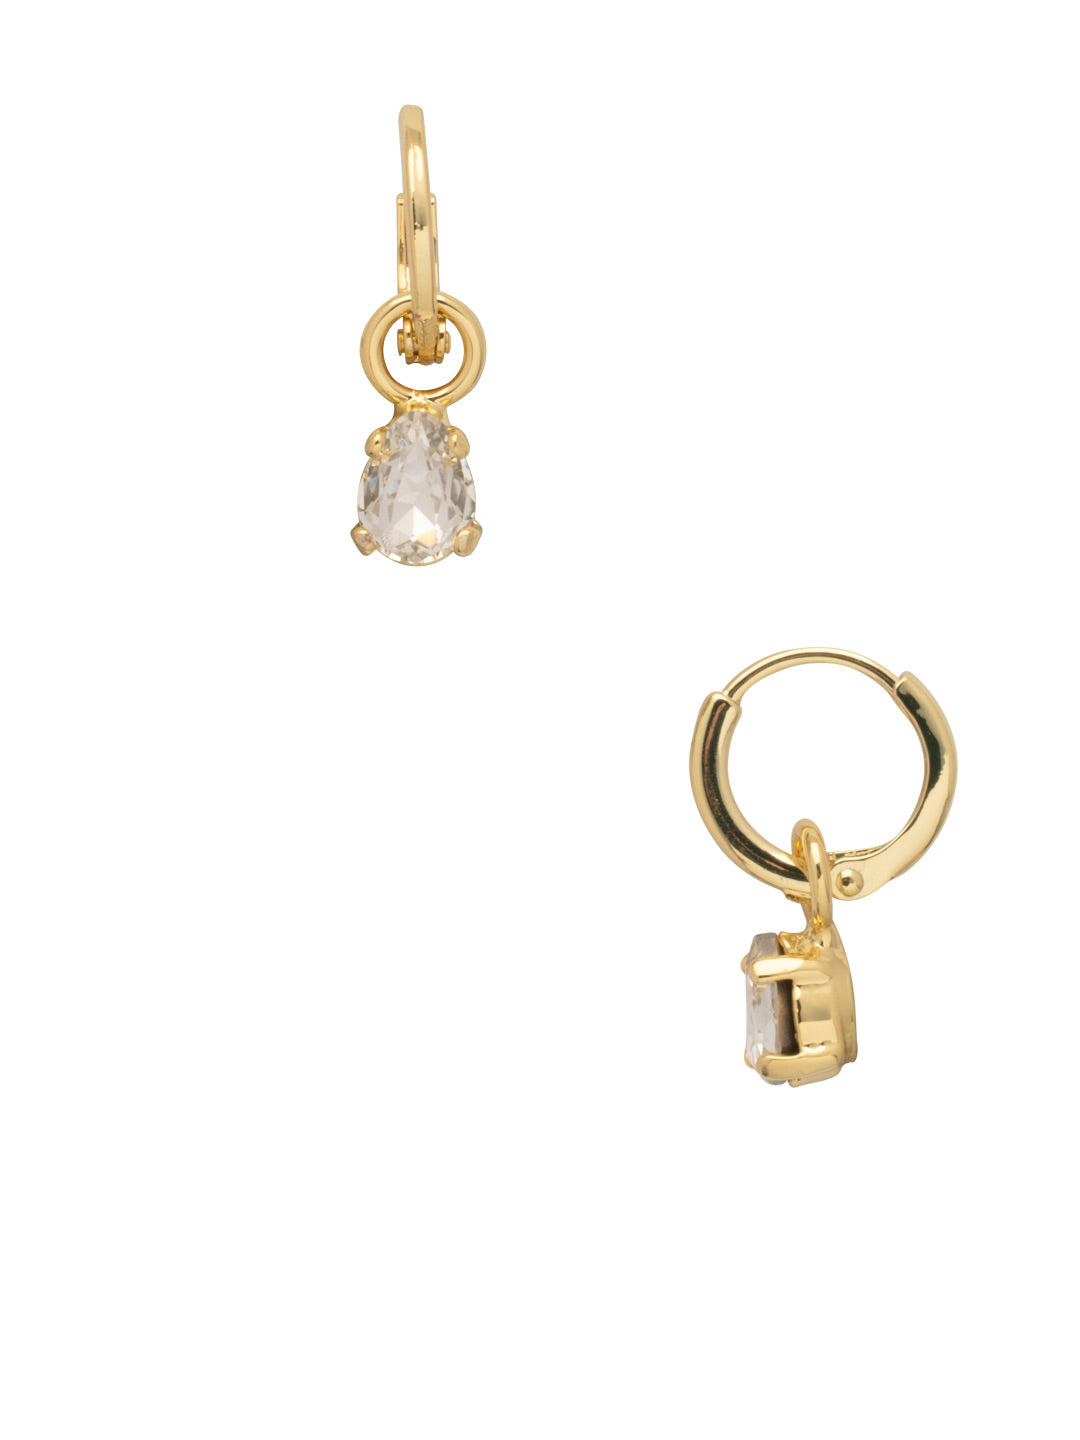 Petite Pear Huggie Hoop Earrings - EFM16BGCRY - <p>The Petite Pear Huggie Hoop Earrings feature a removable petite pear cut crystal on a dainty huggie hoop. From Sorrelli's Crystal collection in our Bright Gold-tone finish.</p>